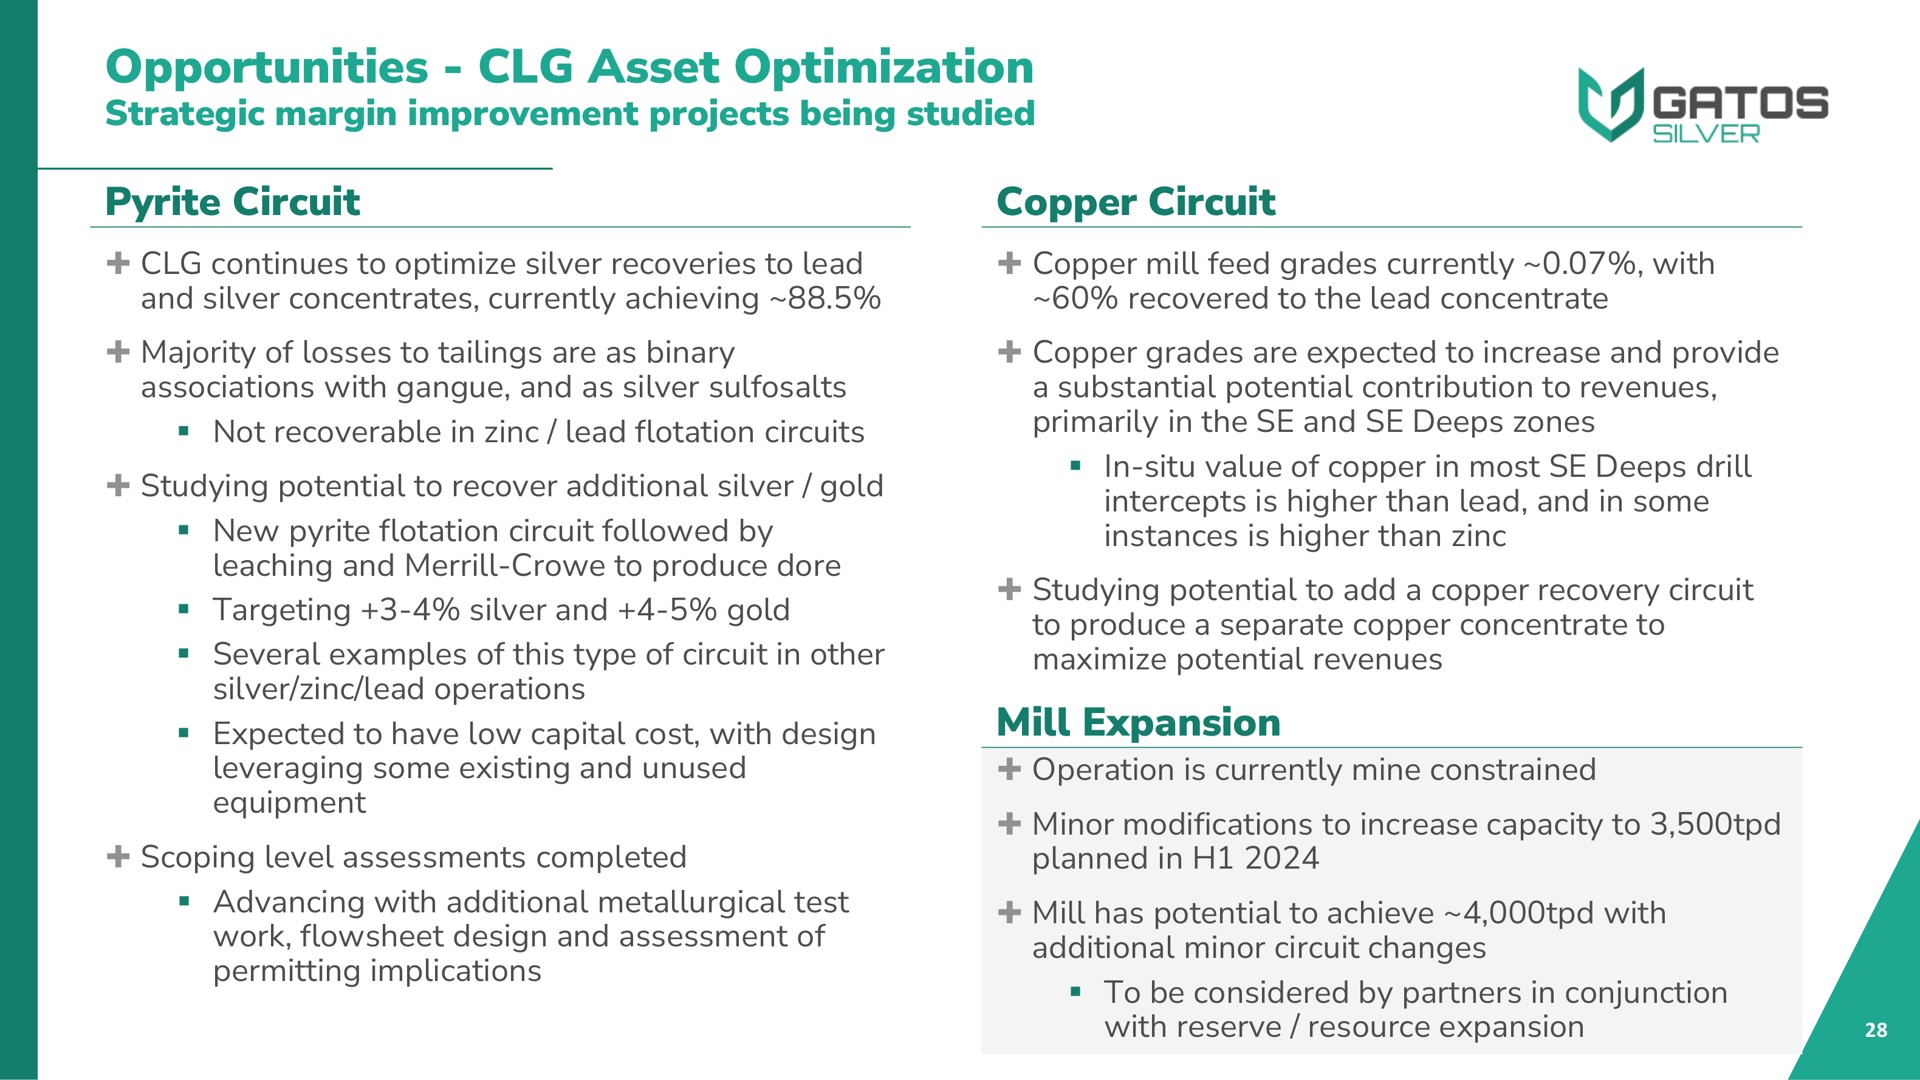 opportunities asset optimization strategic margin improvement projects being studied pyrite circuit copper circuit mill expansion | Gatos Silver